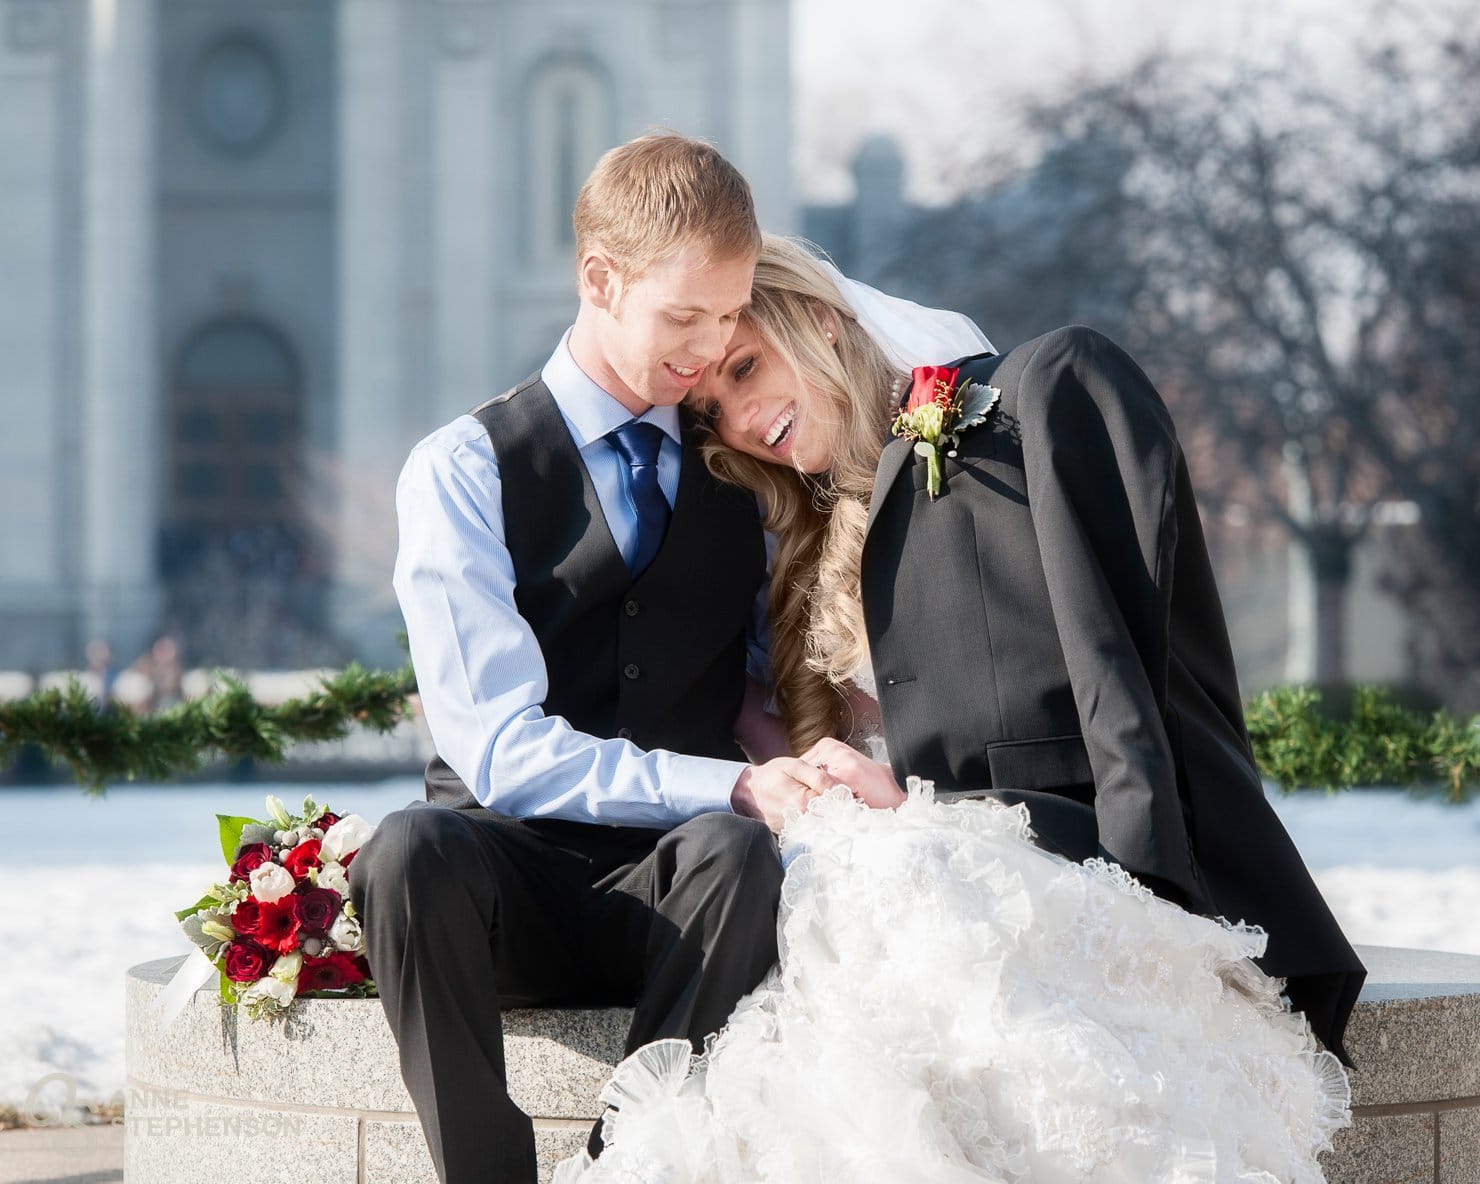 A recently married man places his suit coat jacket over his bride to keep her warm at their winter wedding.